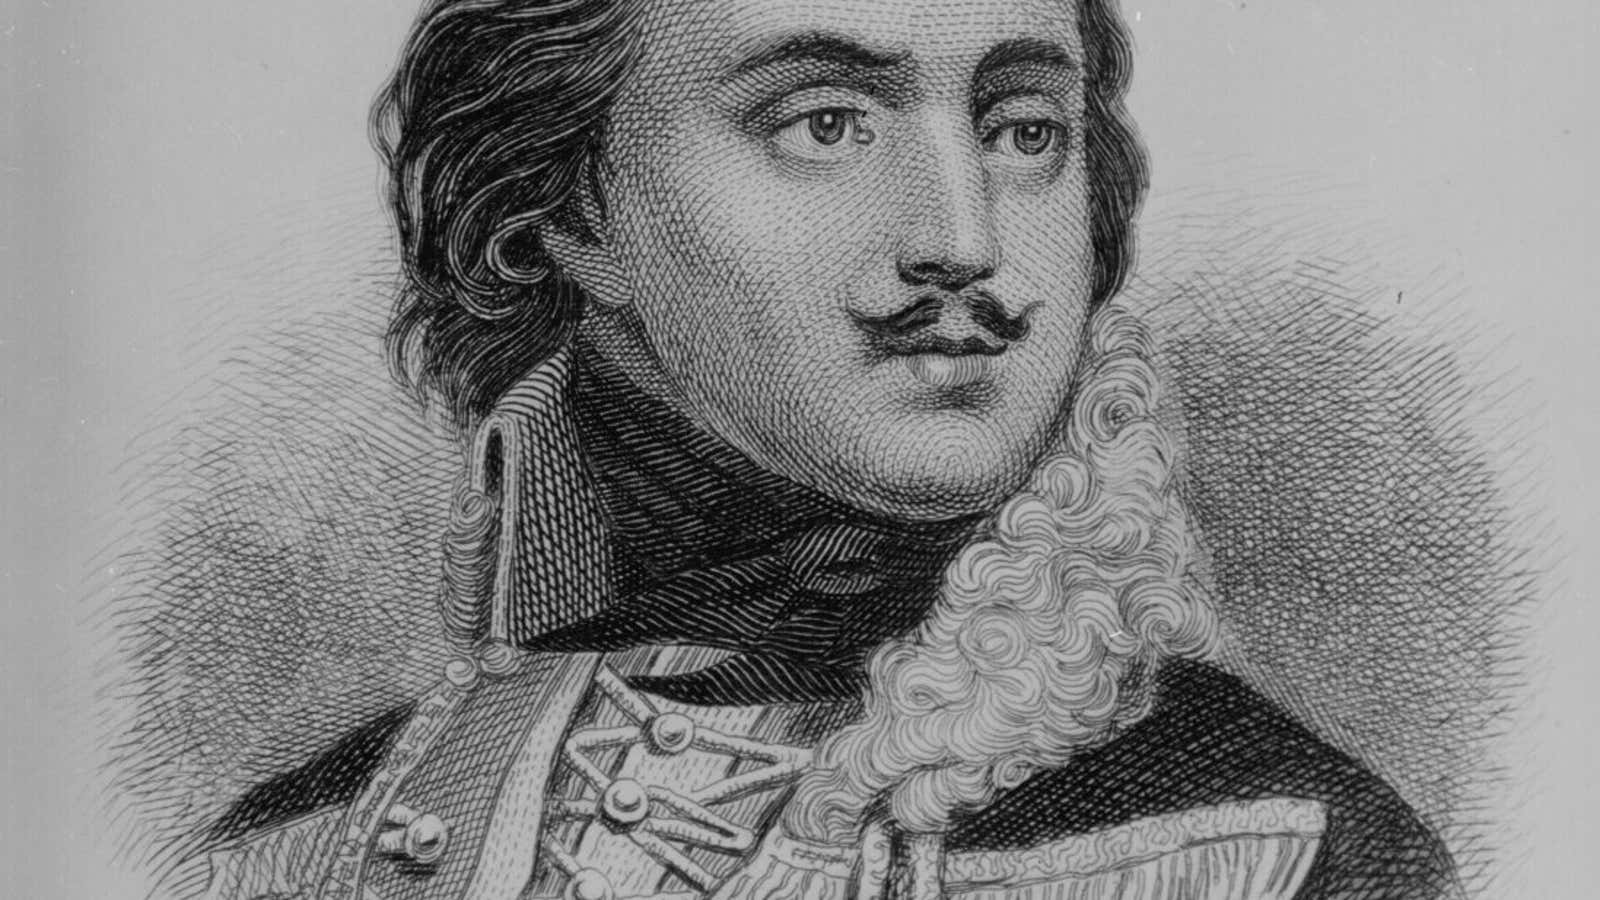 An 1871 engraving of Casimir Pulaski shows his characteristic moustache.